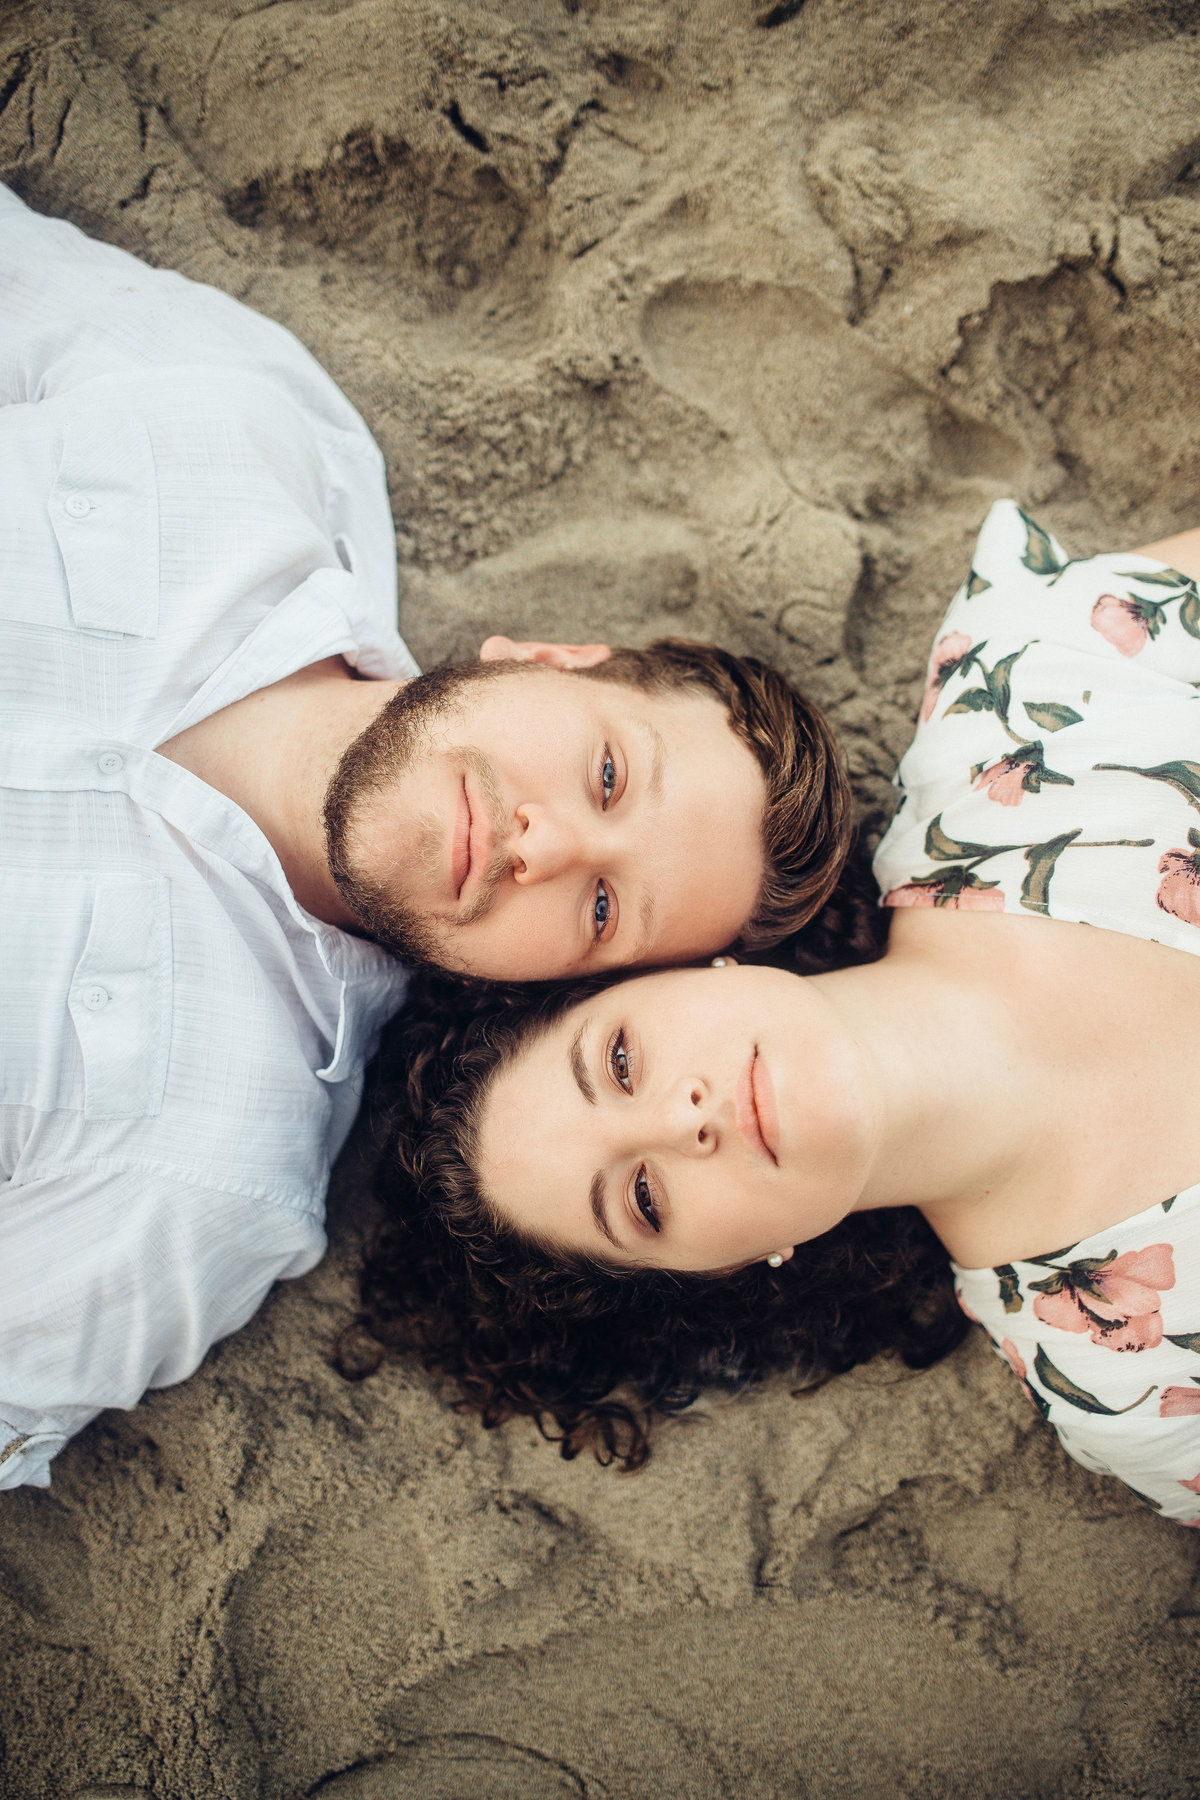 Engagement Photograph Of  Man And Woman  Laying On a Dark Sand Los Angeles